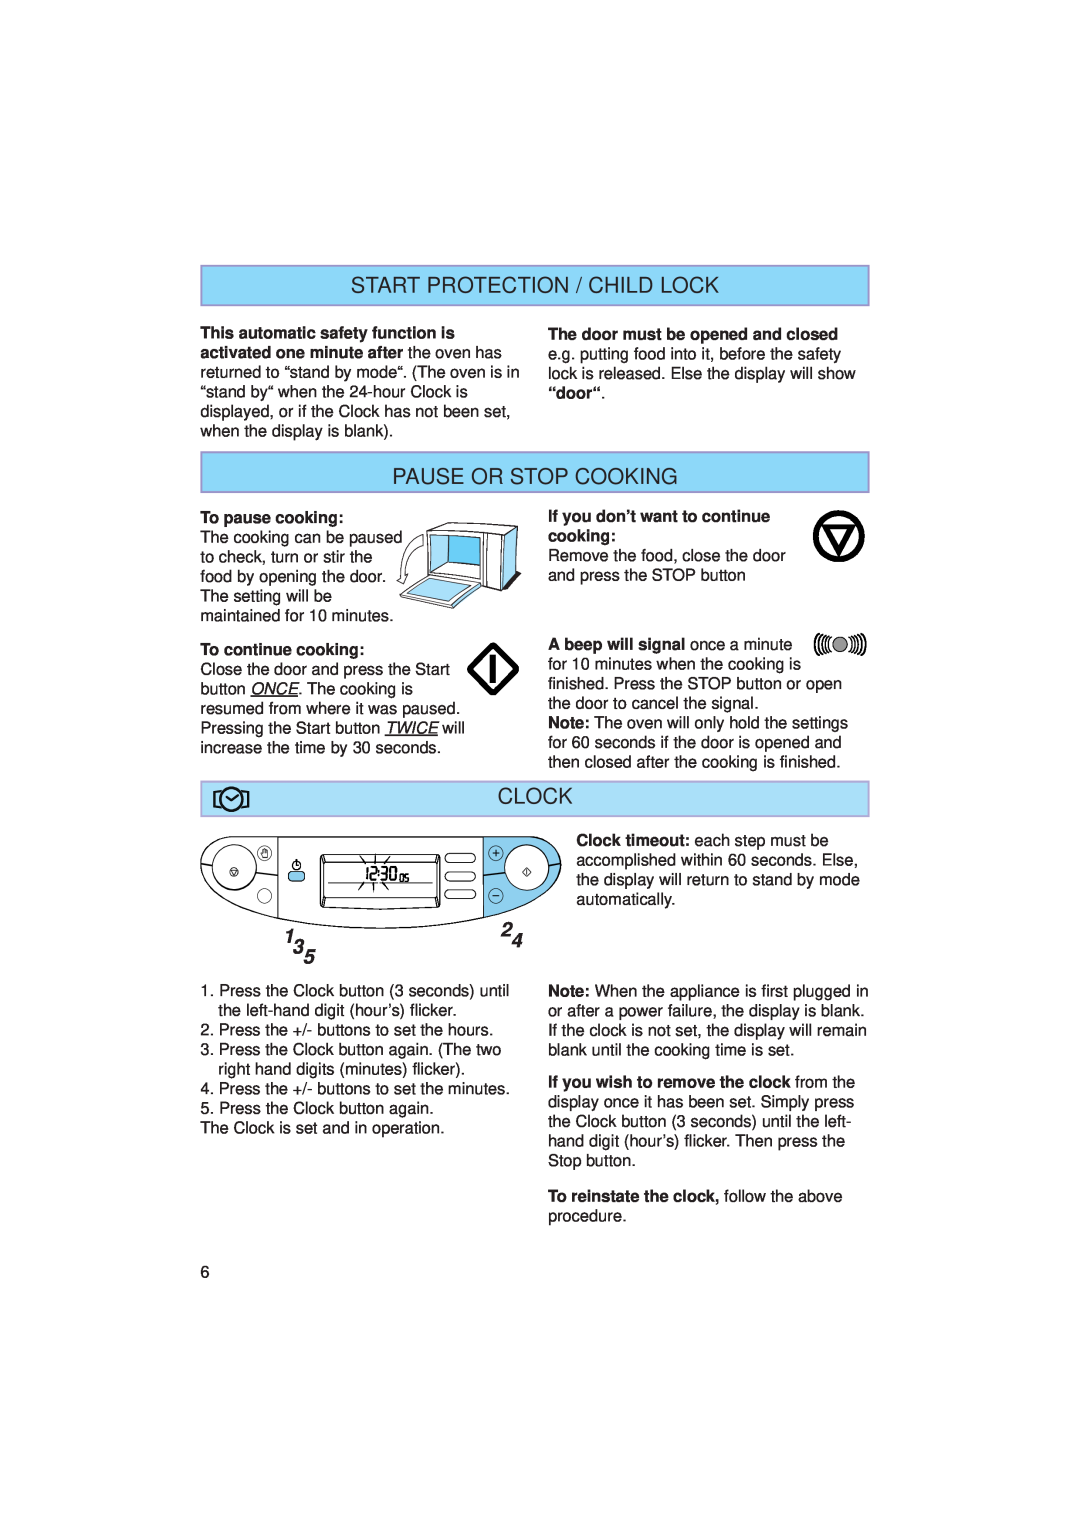 Whirlpool JT 359 manual Start Protection / Child Lock, Pause Or Stop Cooking, Clock, 13524 